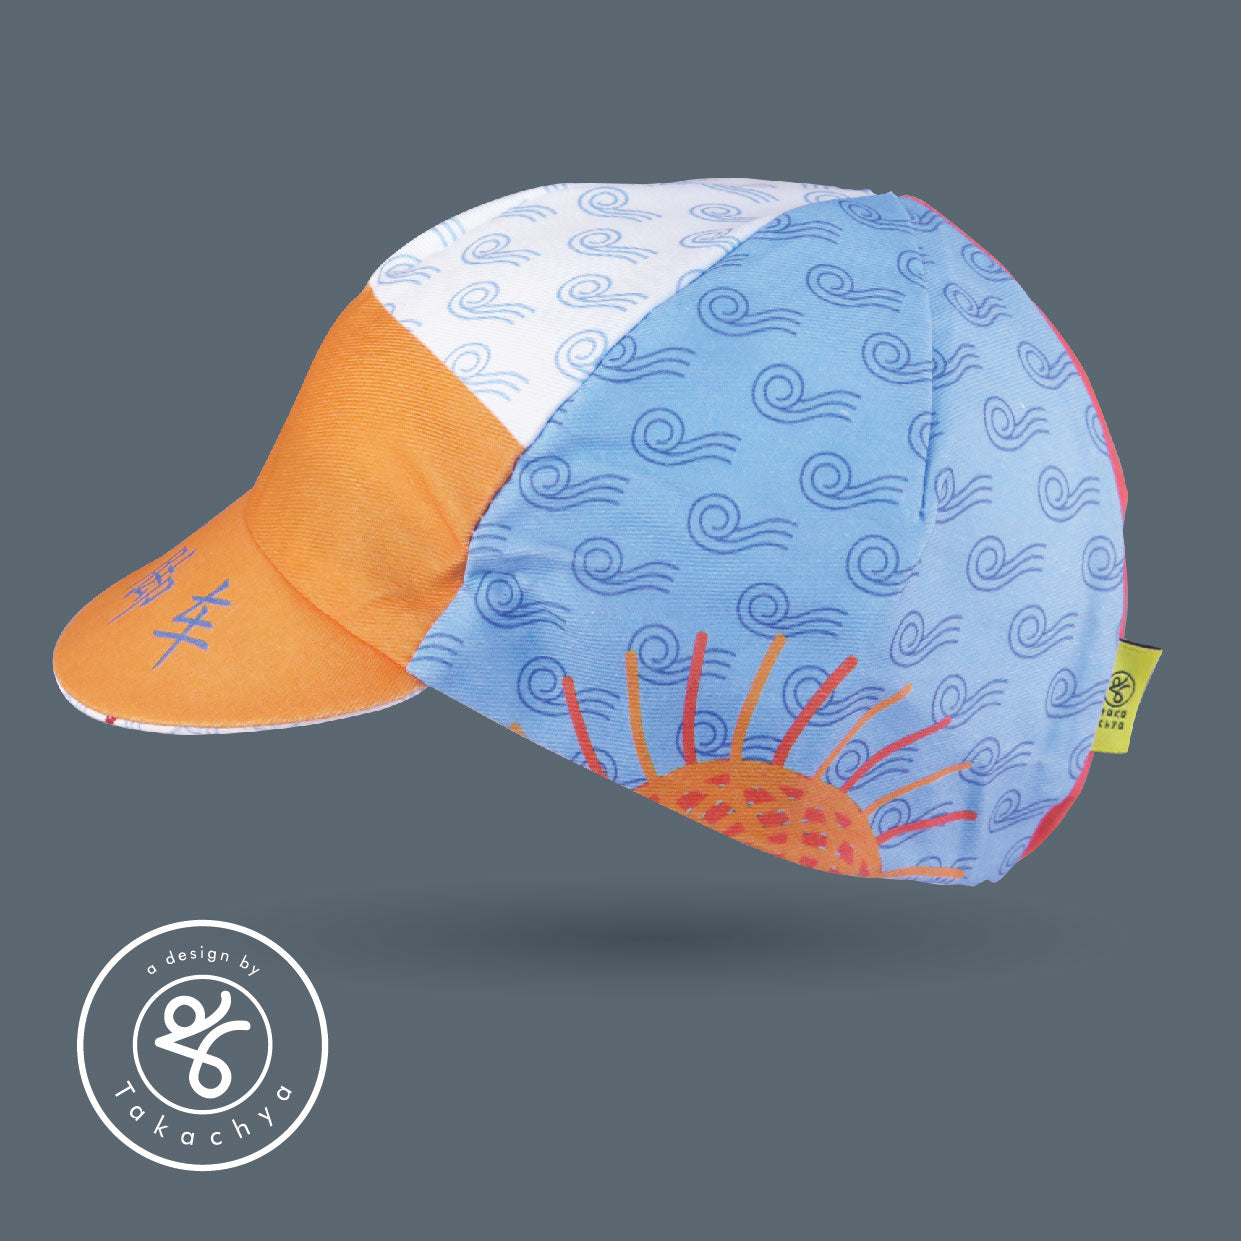 Nice Sun and Wind Chinese Idiom - A design by Takachya Cycling Cap